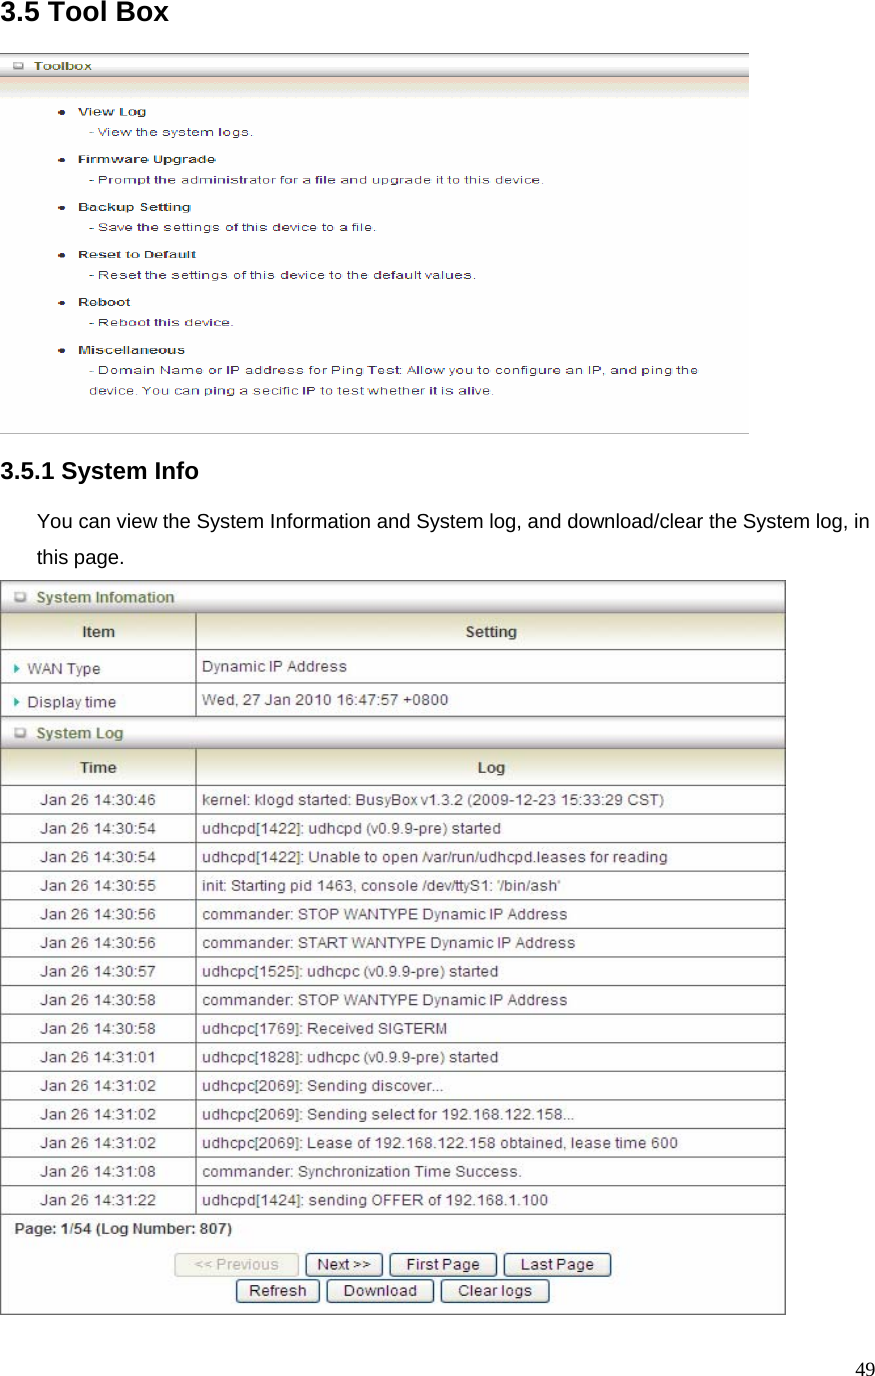  493.5 Tool Box    3.5.1 System Info  You can view the System Information and System log, and download/clear the System log, in this page.  